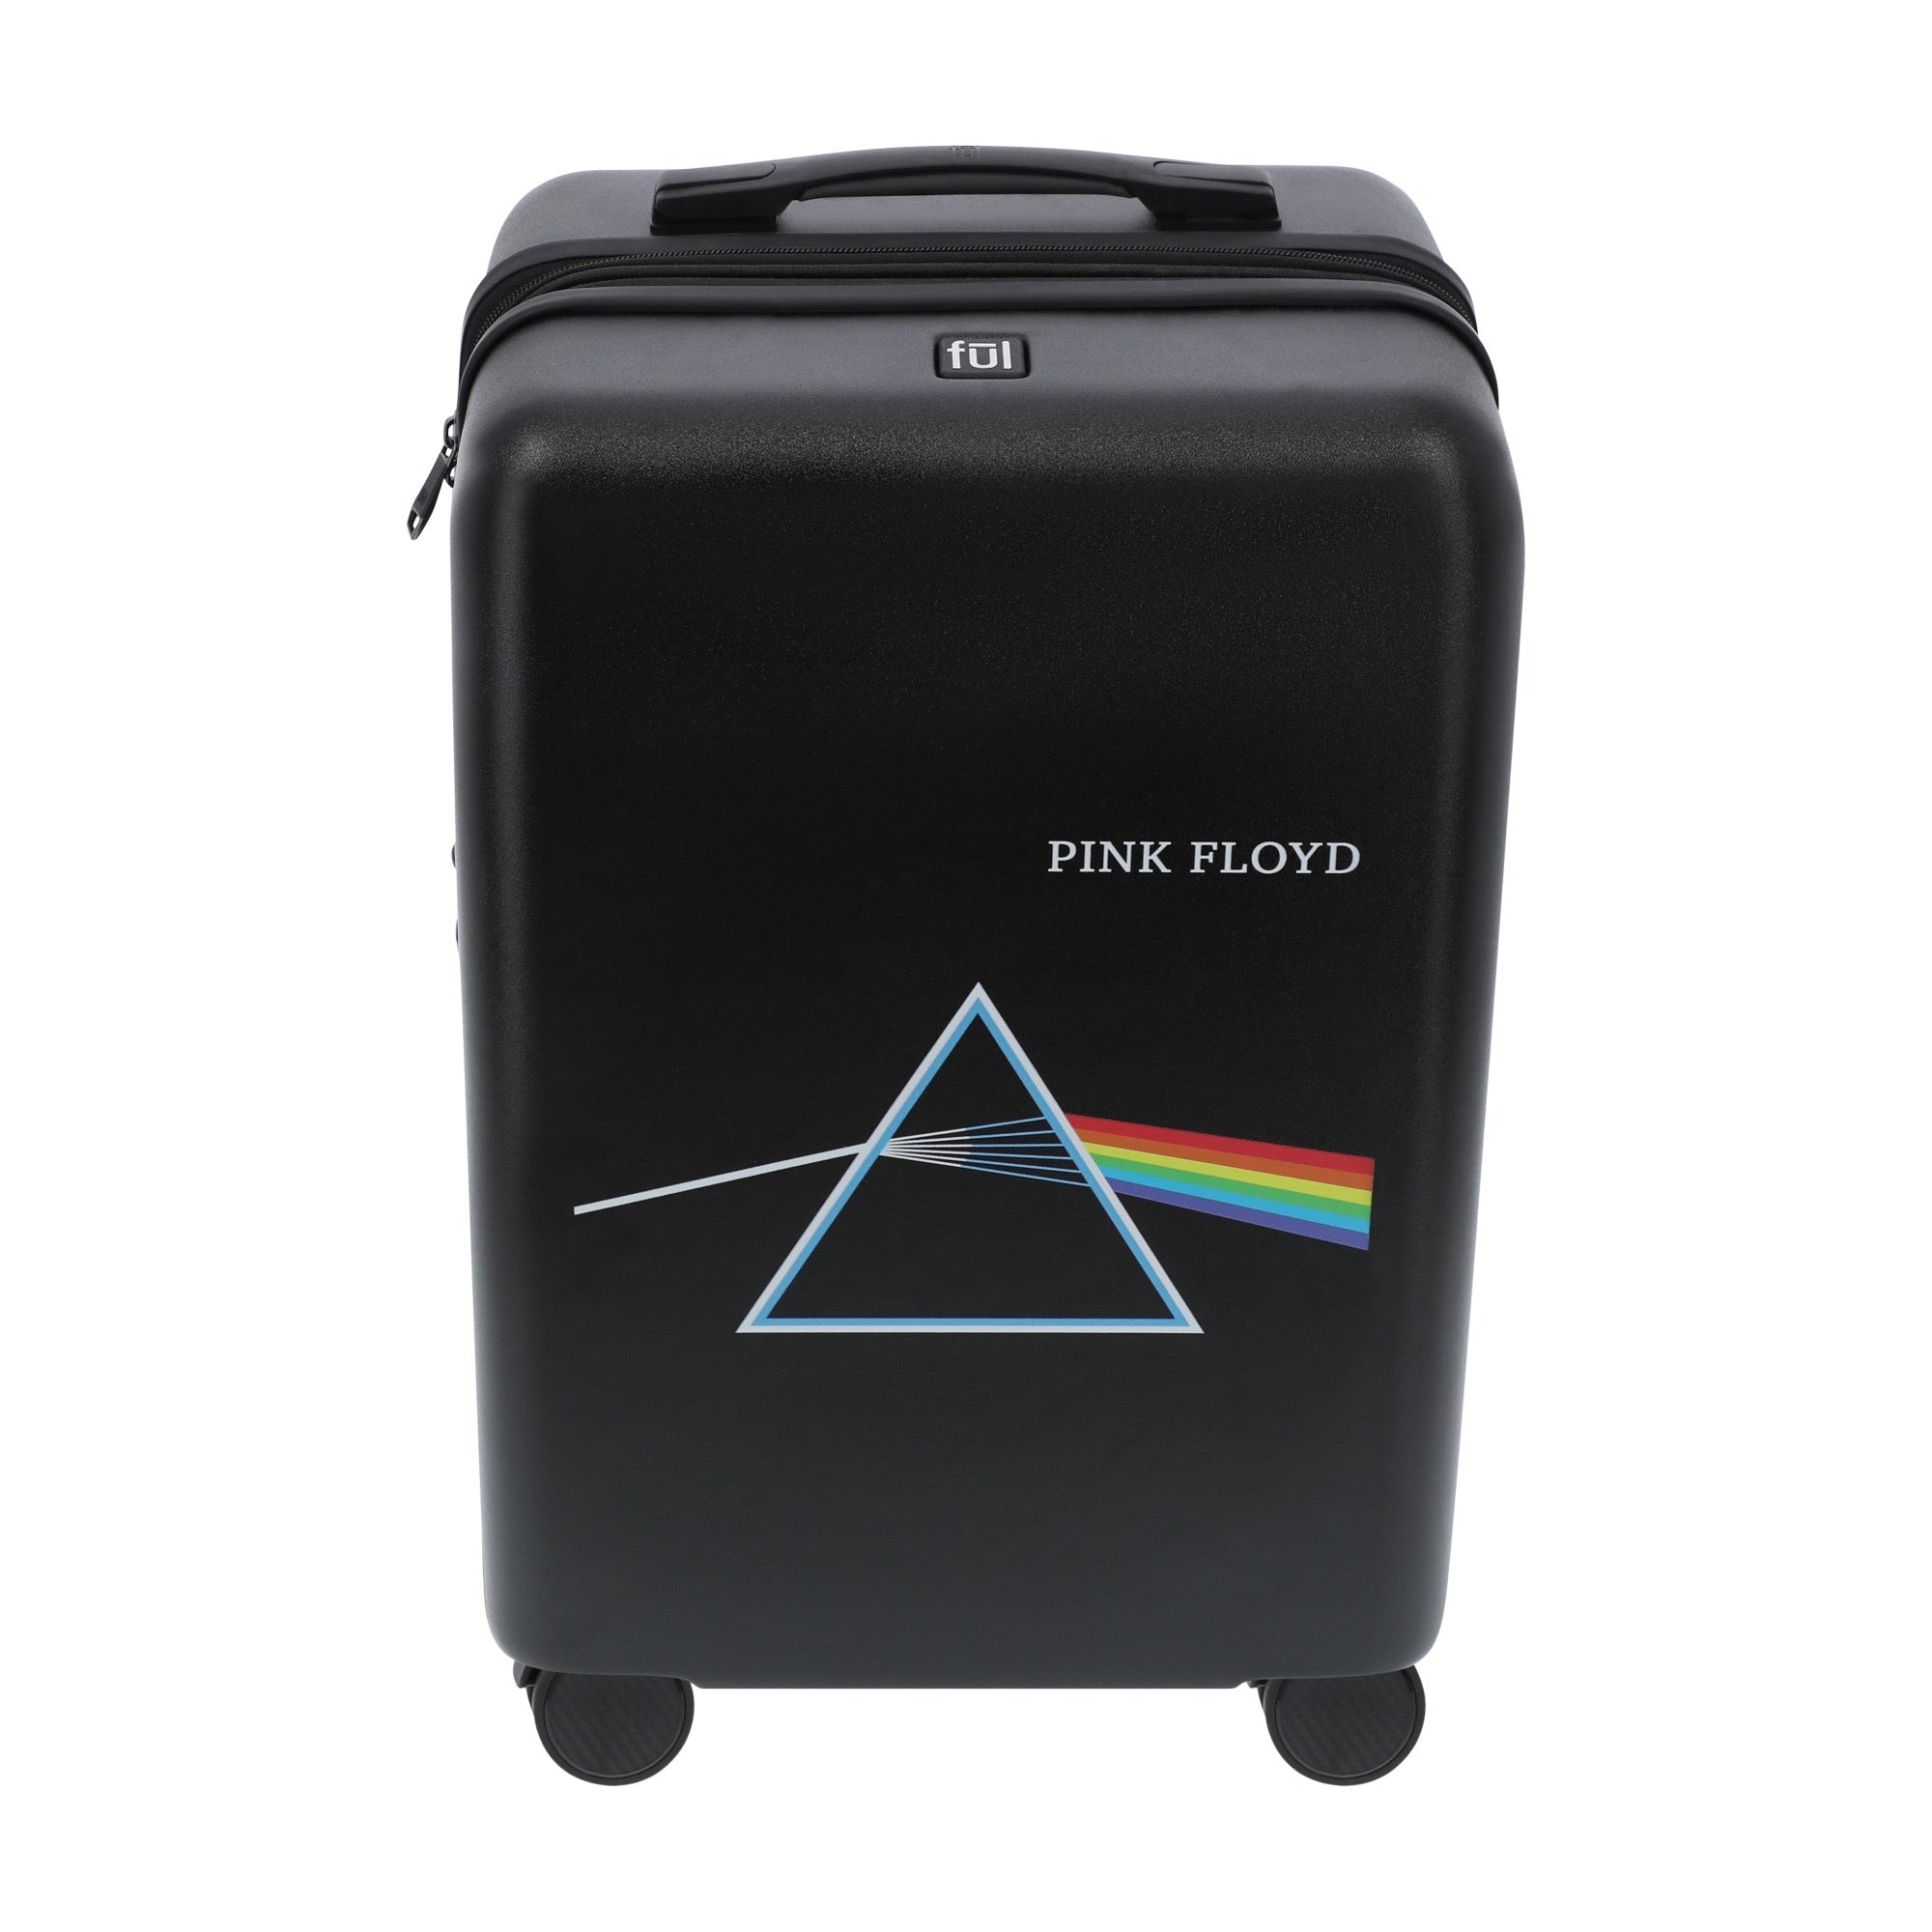 Pink Floyd 22.5" black carry-on spinner suitcase luggage by Ful